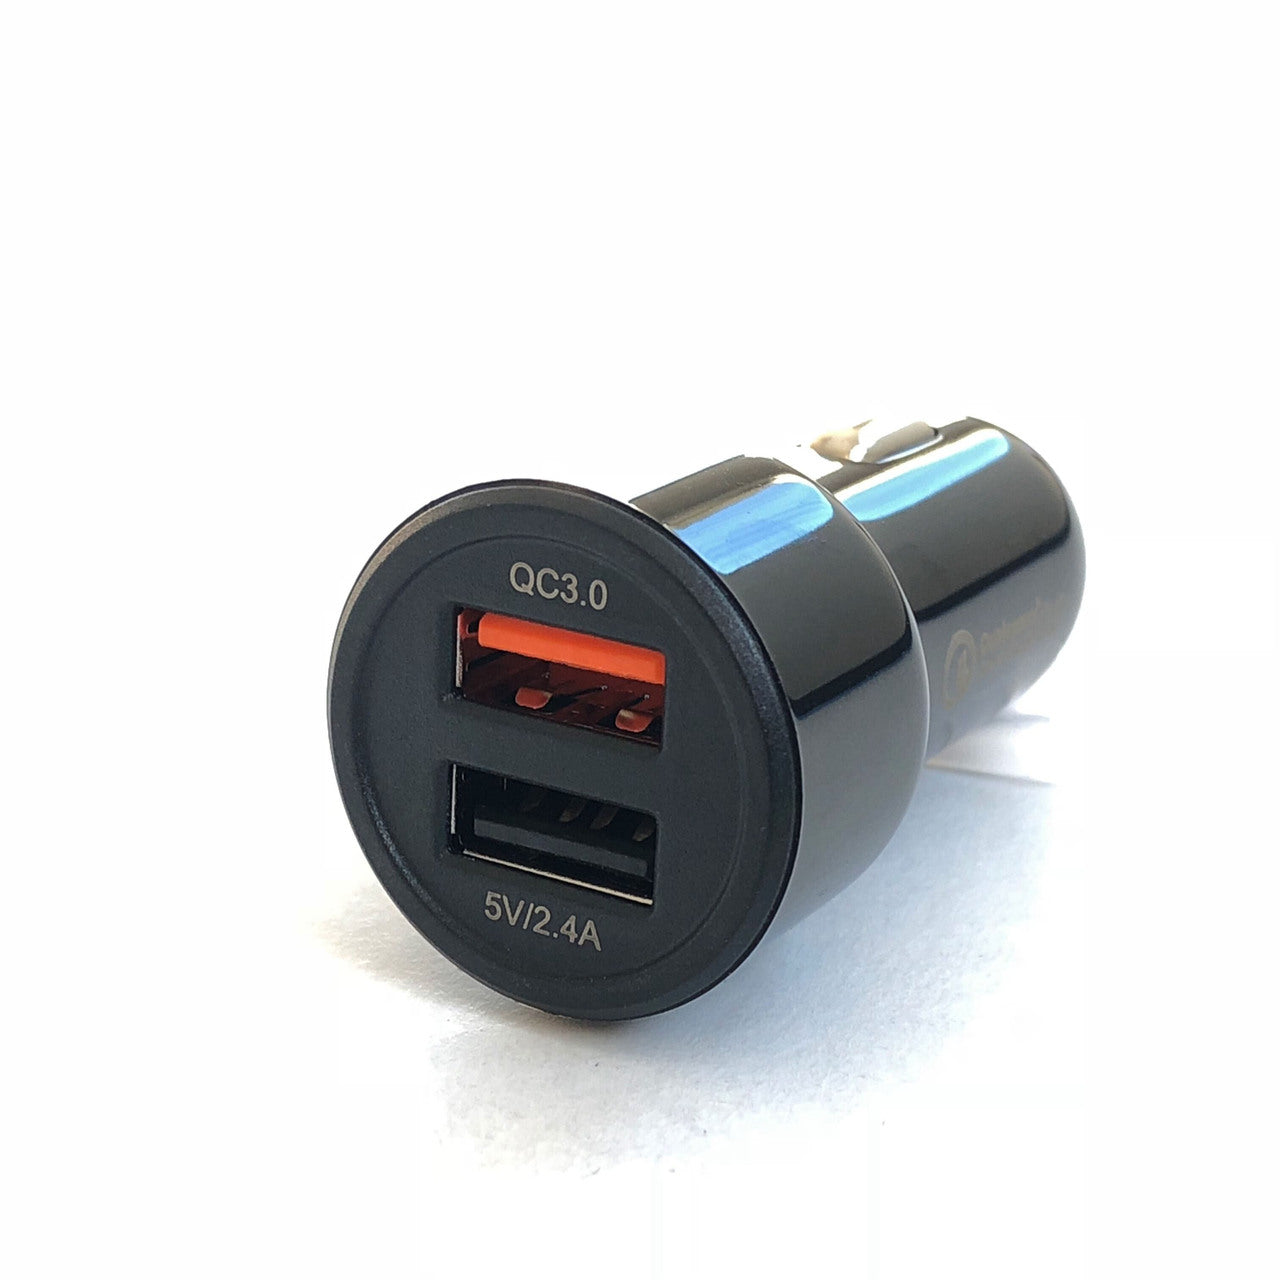 USB Charger with QC3 Technology